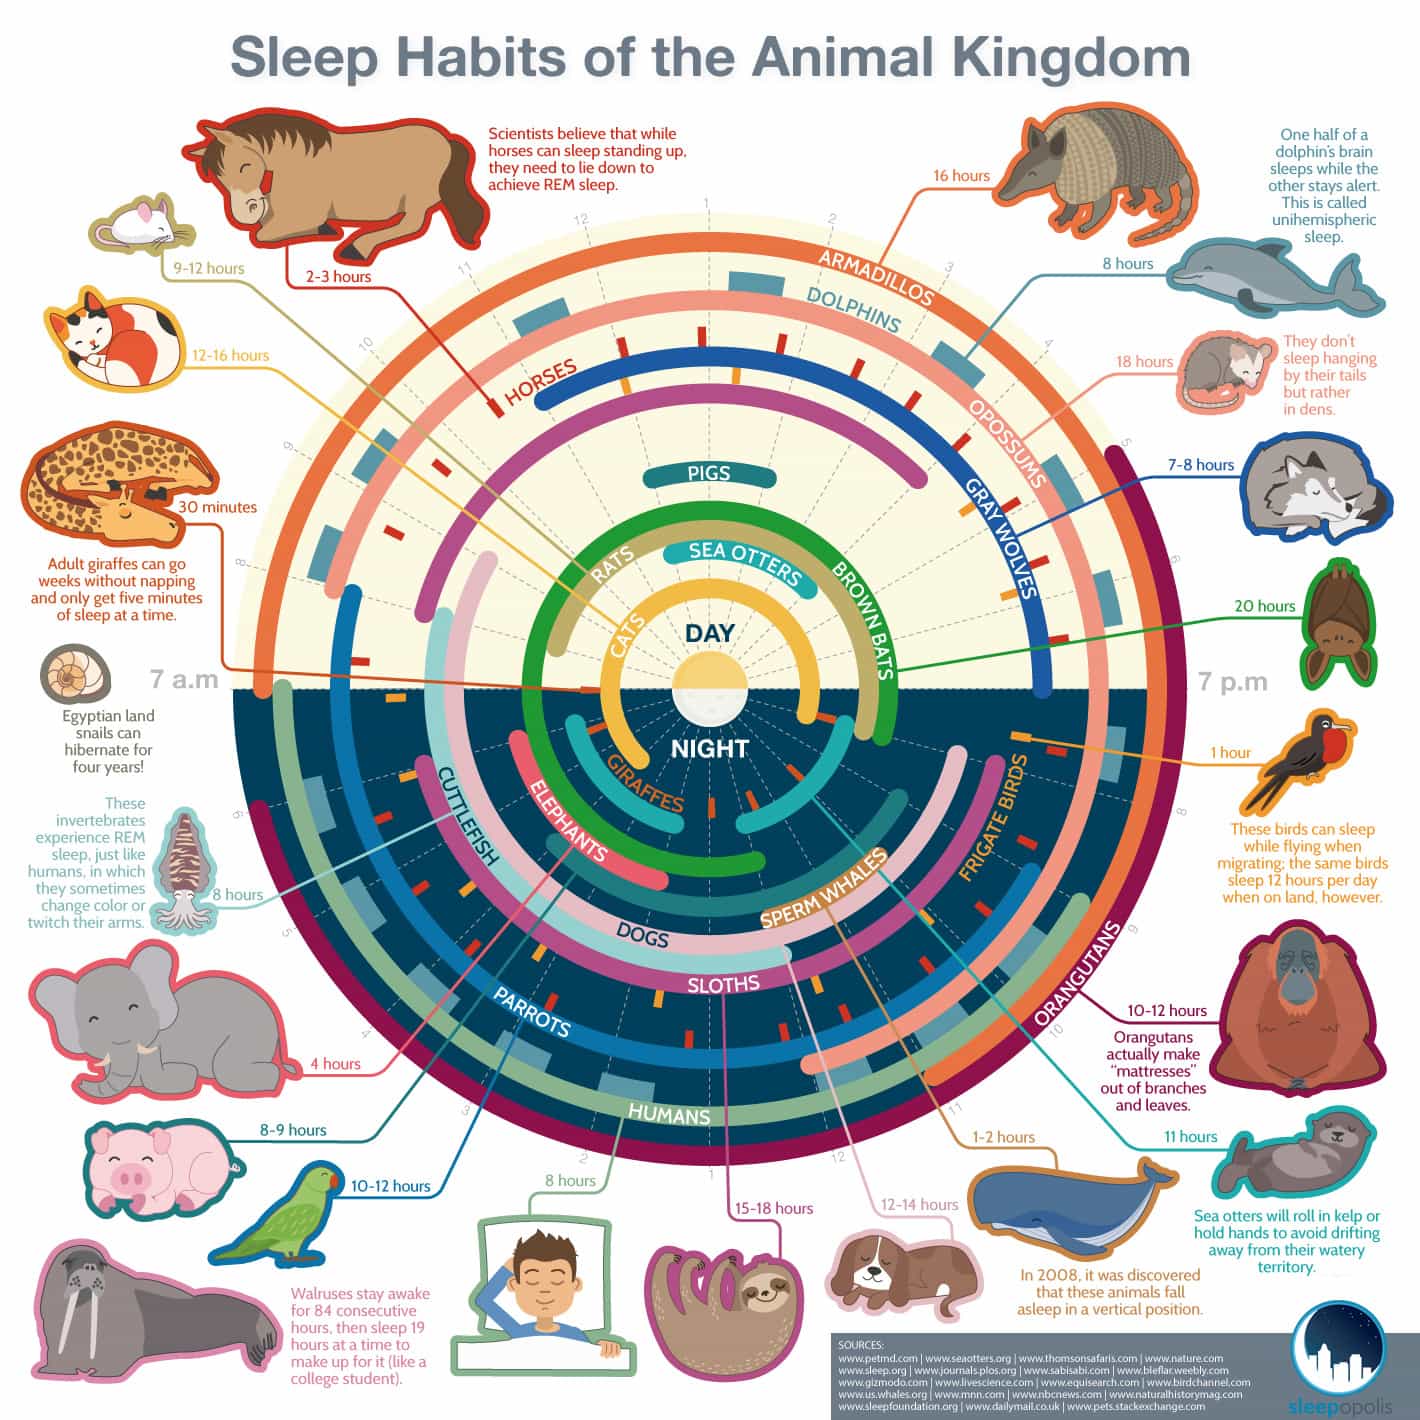 Why do different animals have different sleep habits?